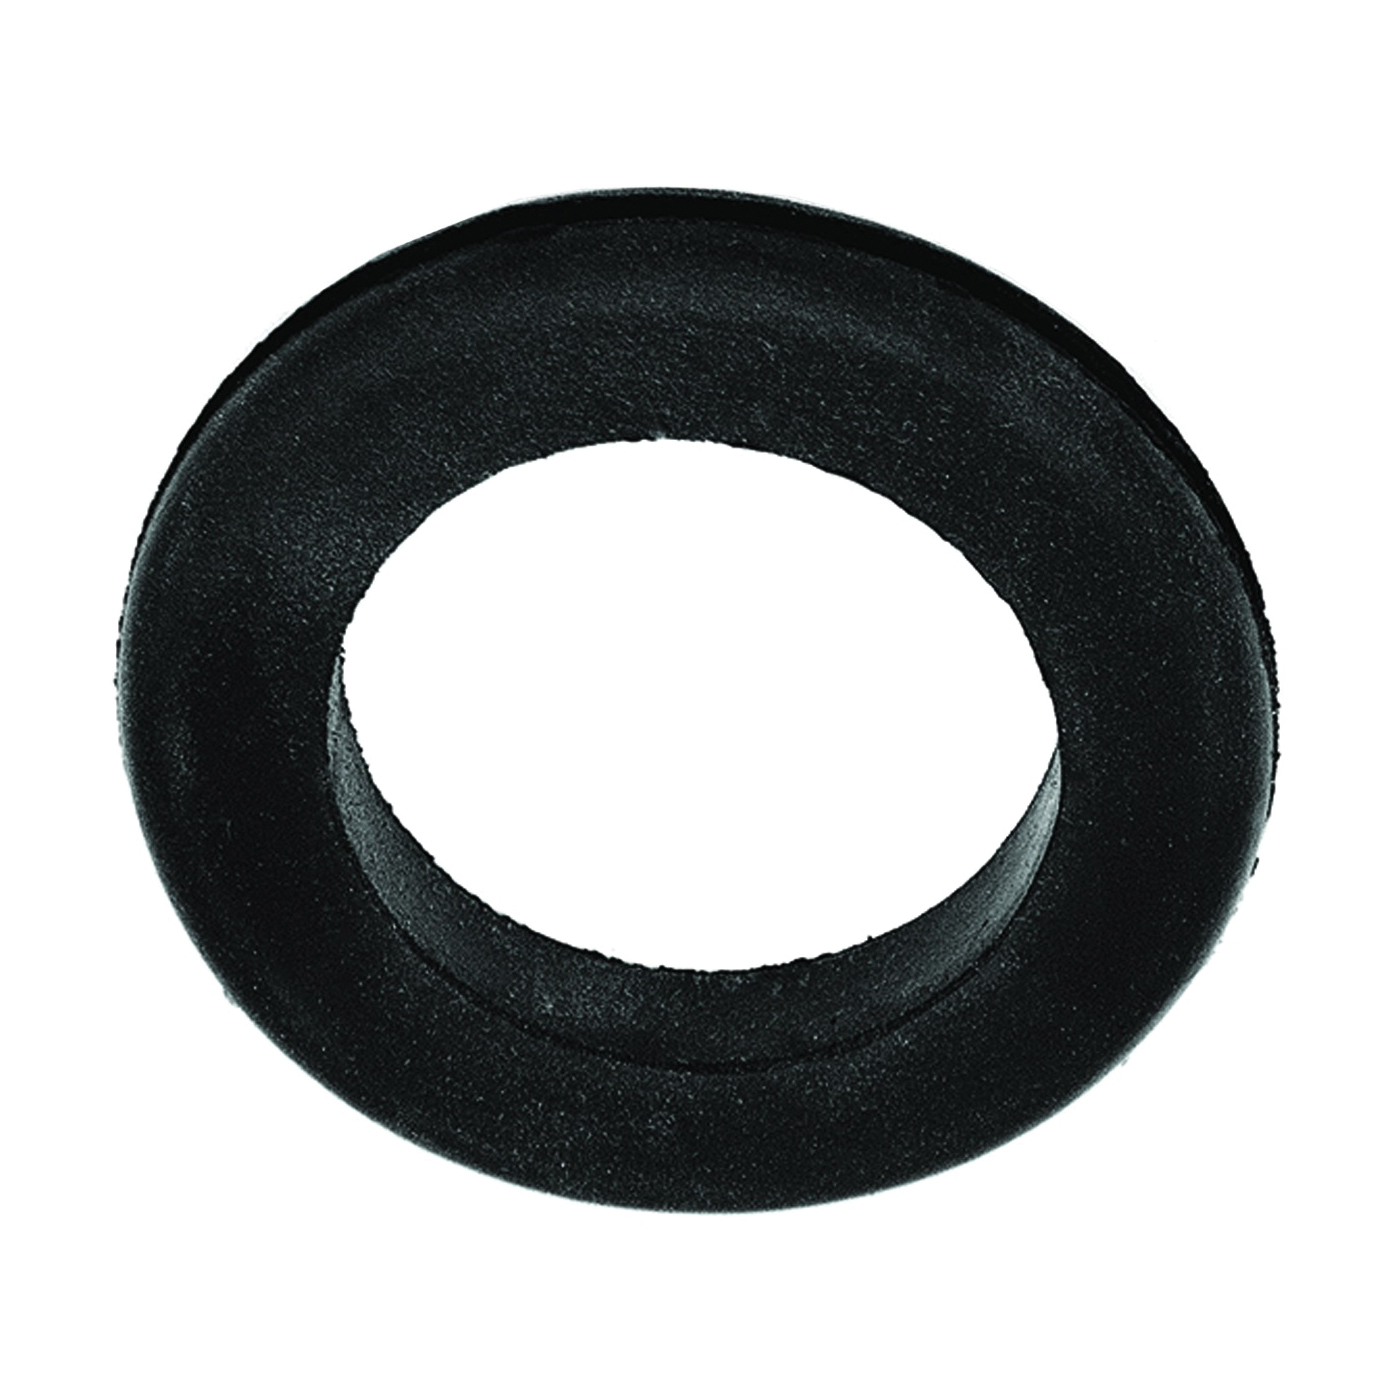 61492 Grommet, Rubber, Black, 5/16 in Thick Panel